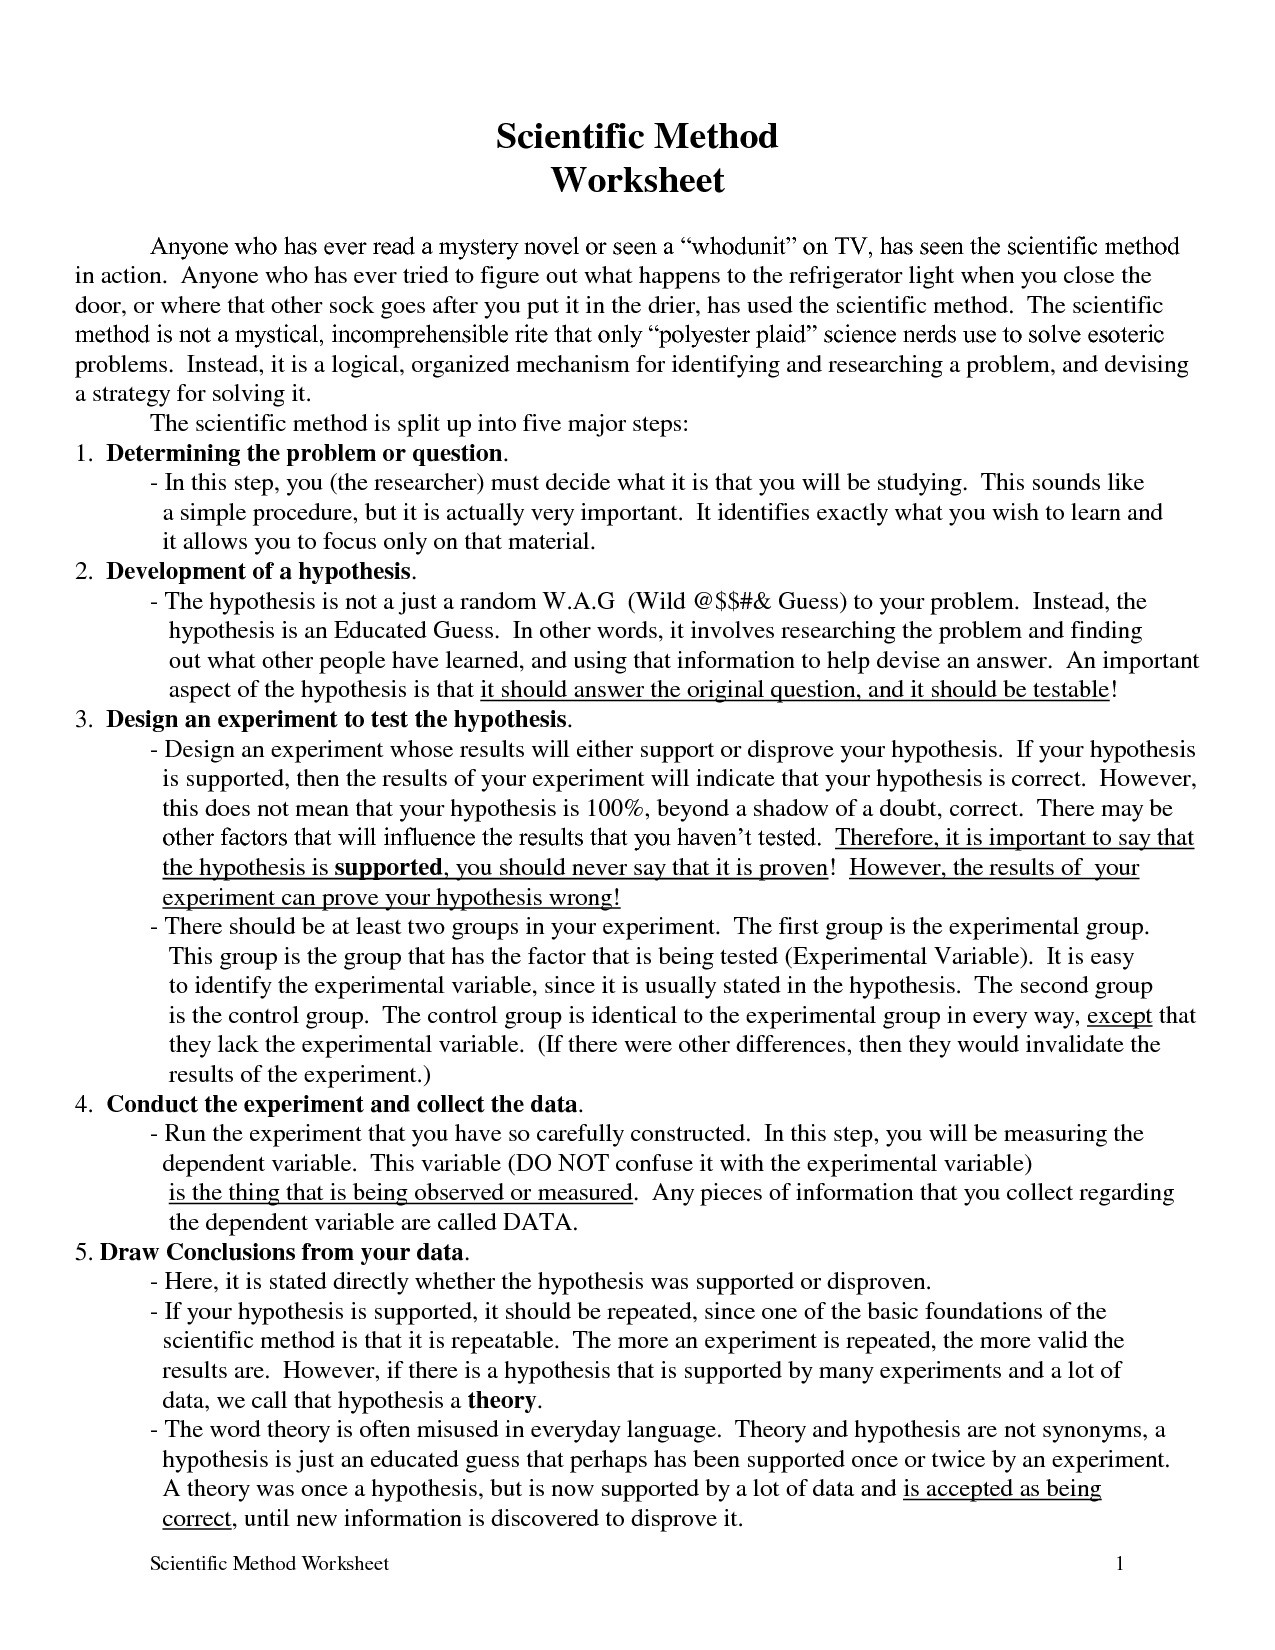 16 Best Images of Science Worksheets For High School With A Key